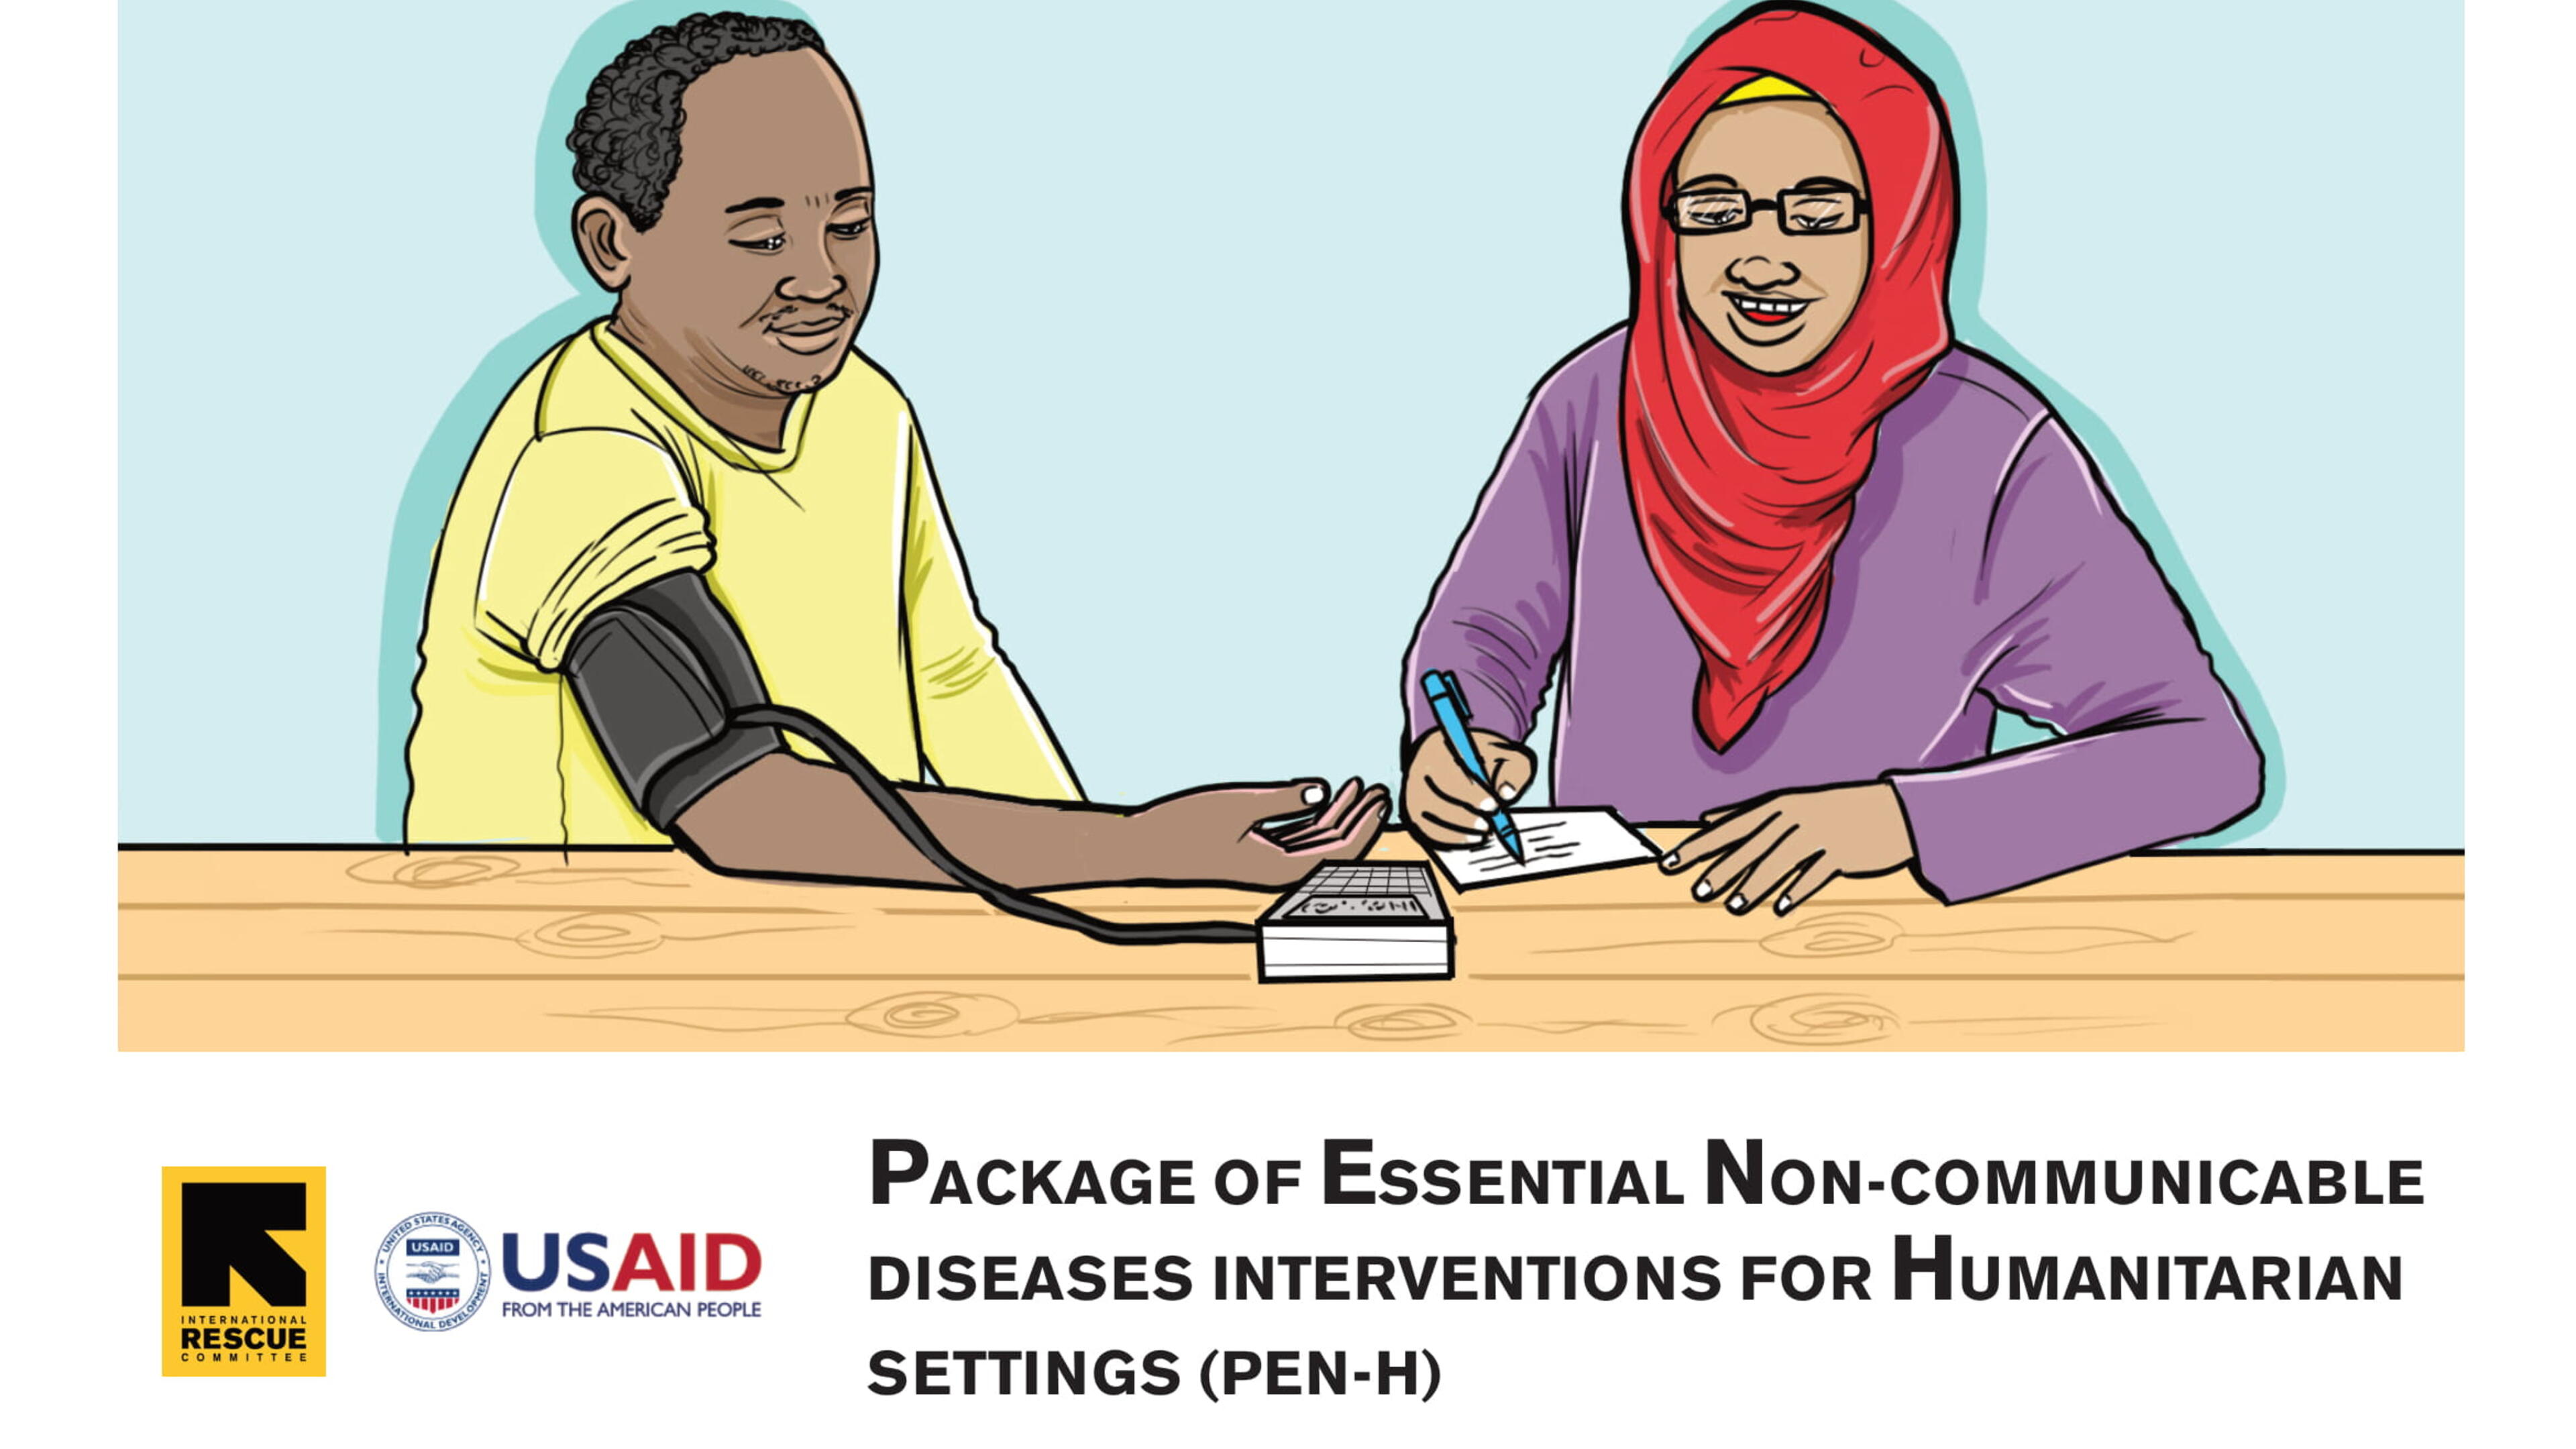 Package of Essential Non-Communicable Diseases Interventions for Humanitarian Settings (PEN-H)